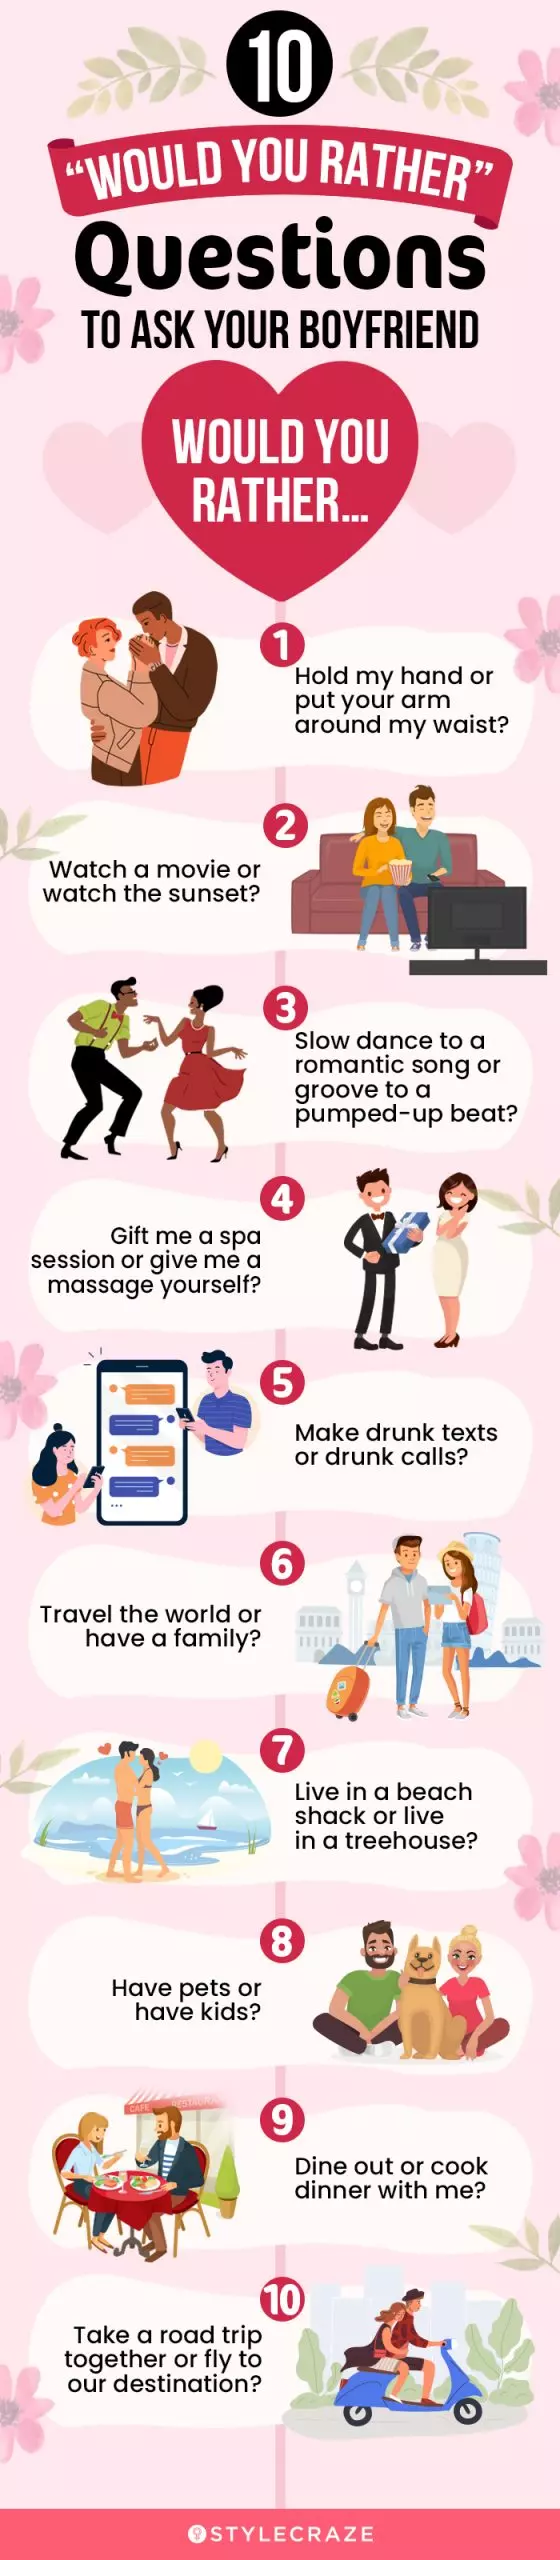 10 would you rather questions to ask your boyfriend (infographic)